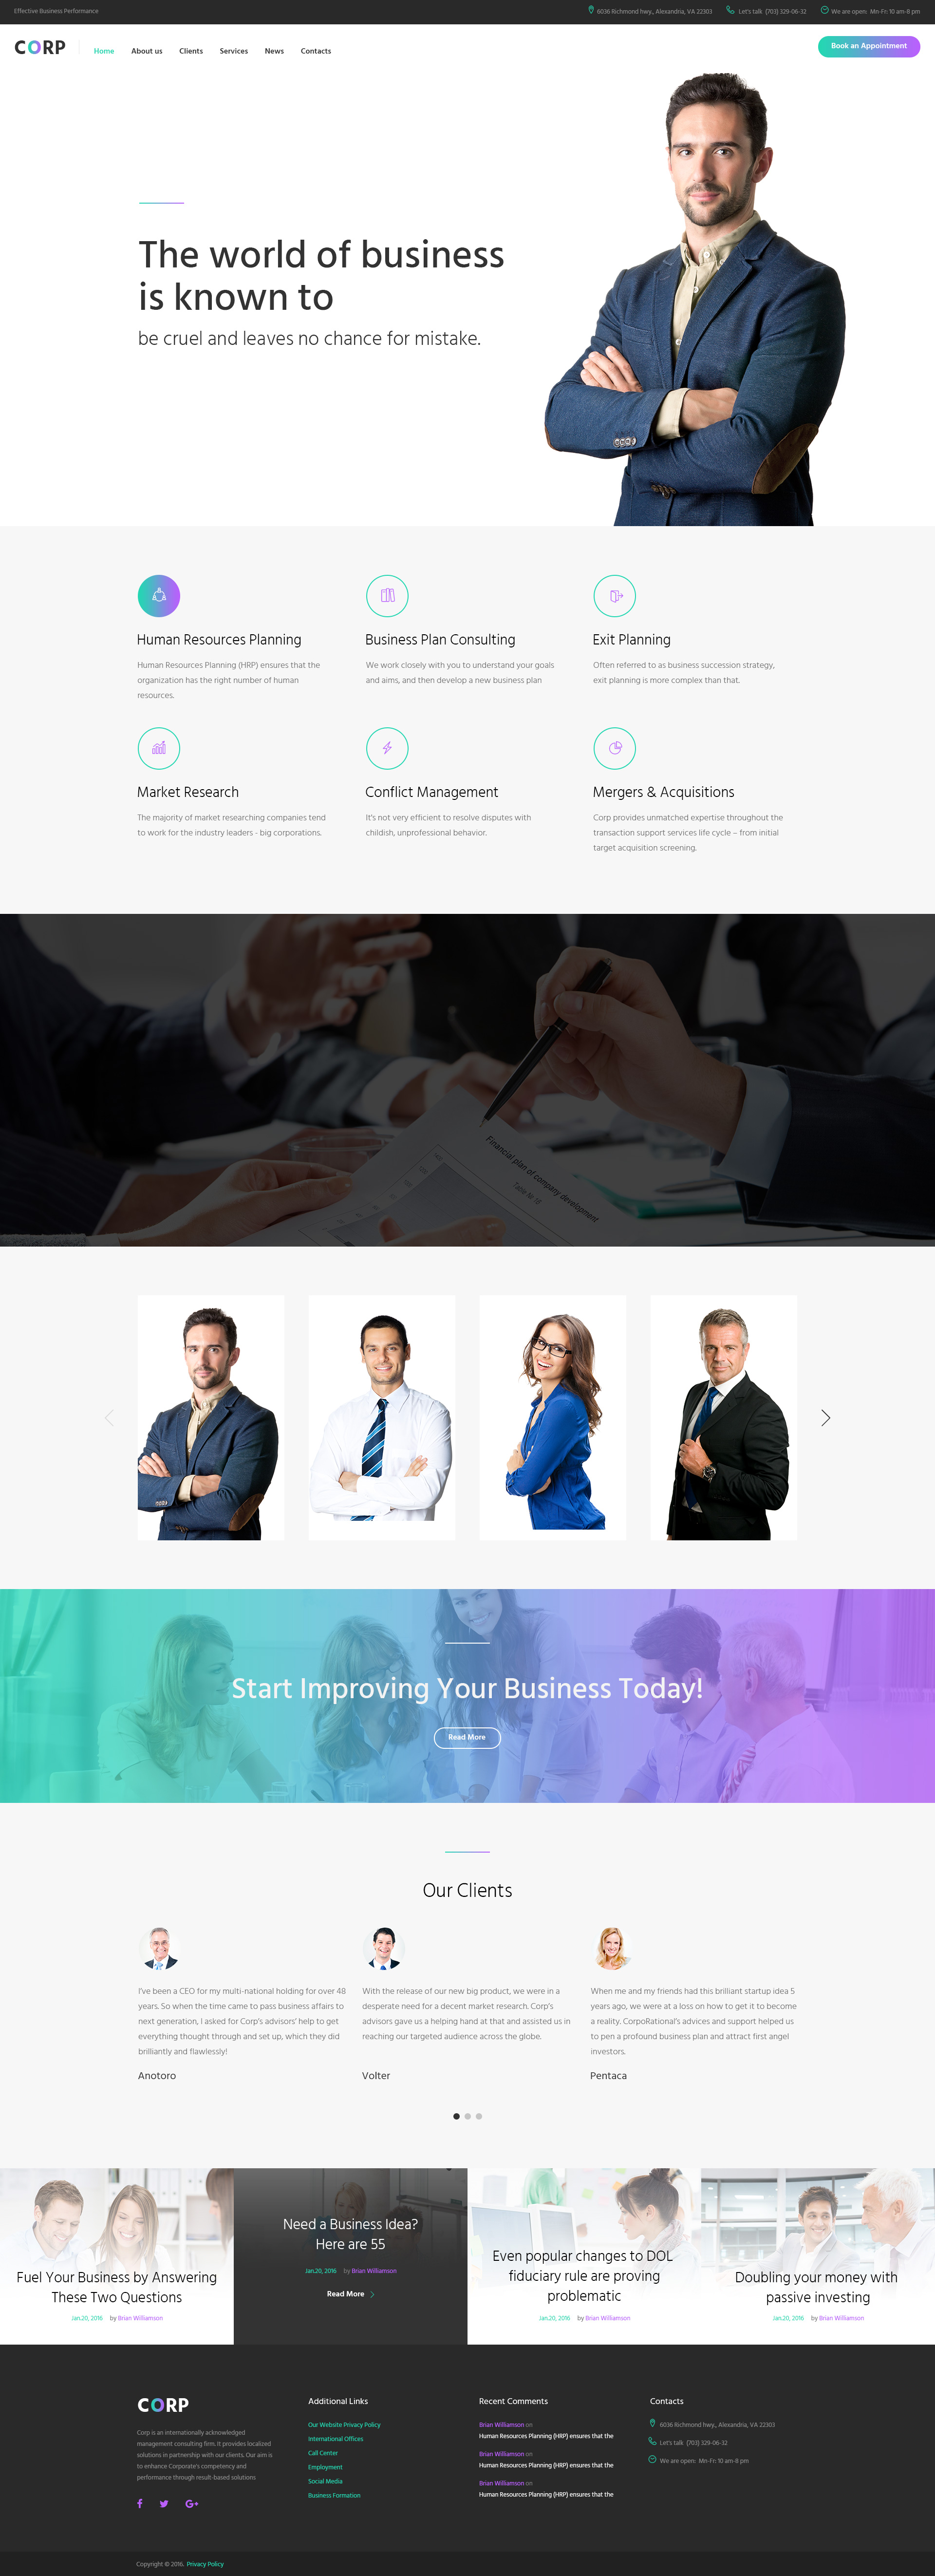 Corp - Consulting Firm Responsive Multipage Website Template